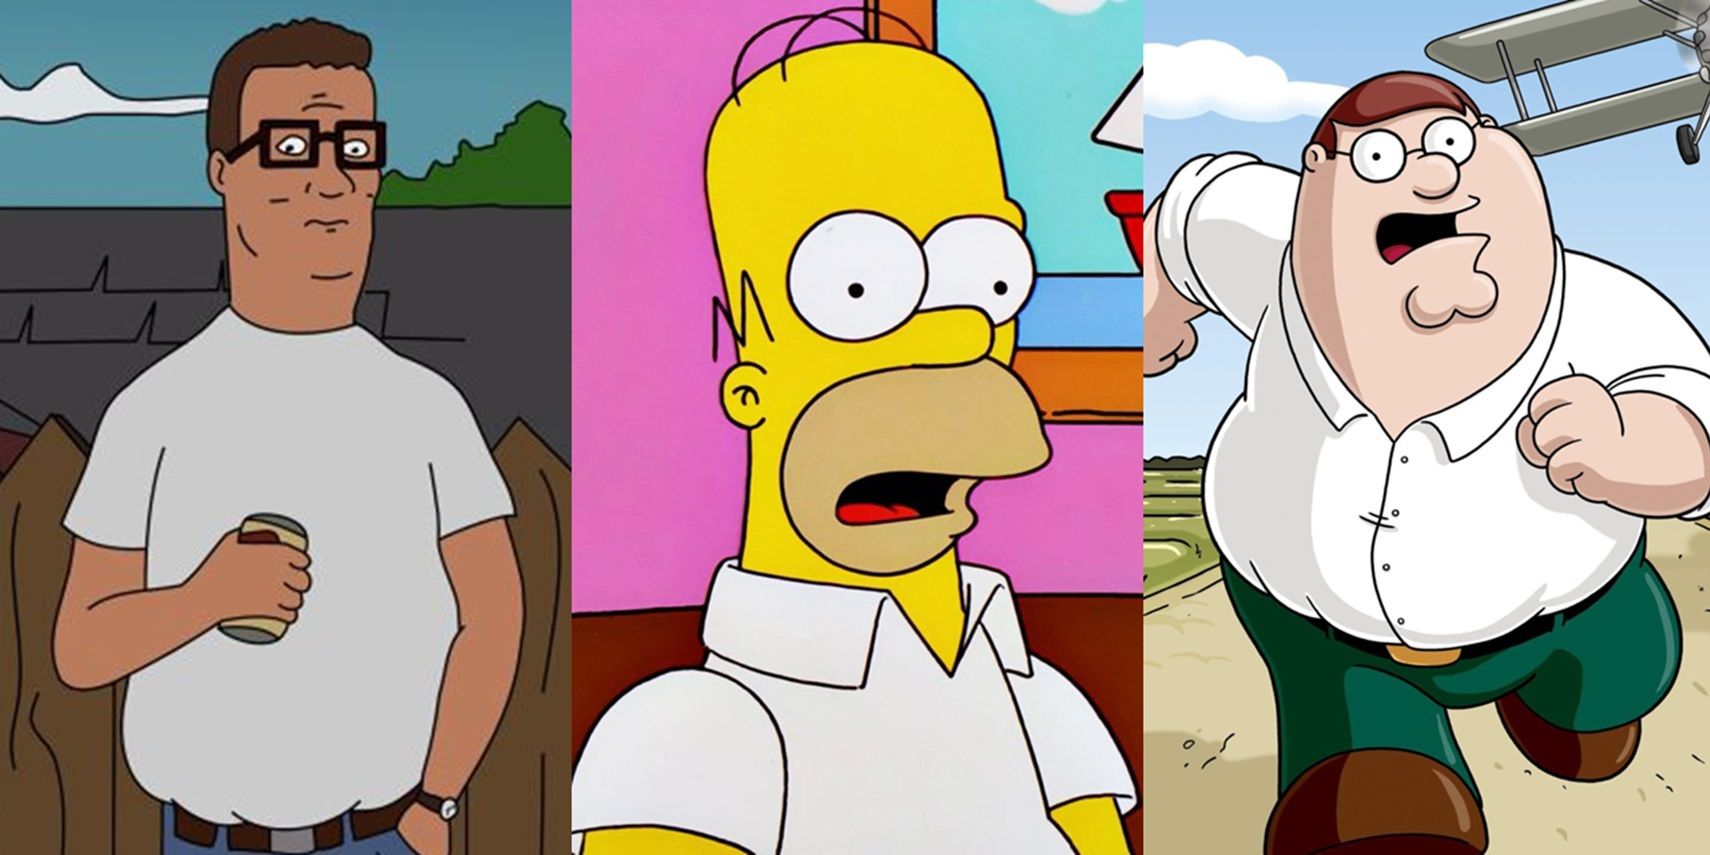 Split image of Hank Hill, Homer Simpson, and Peter Griffin